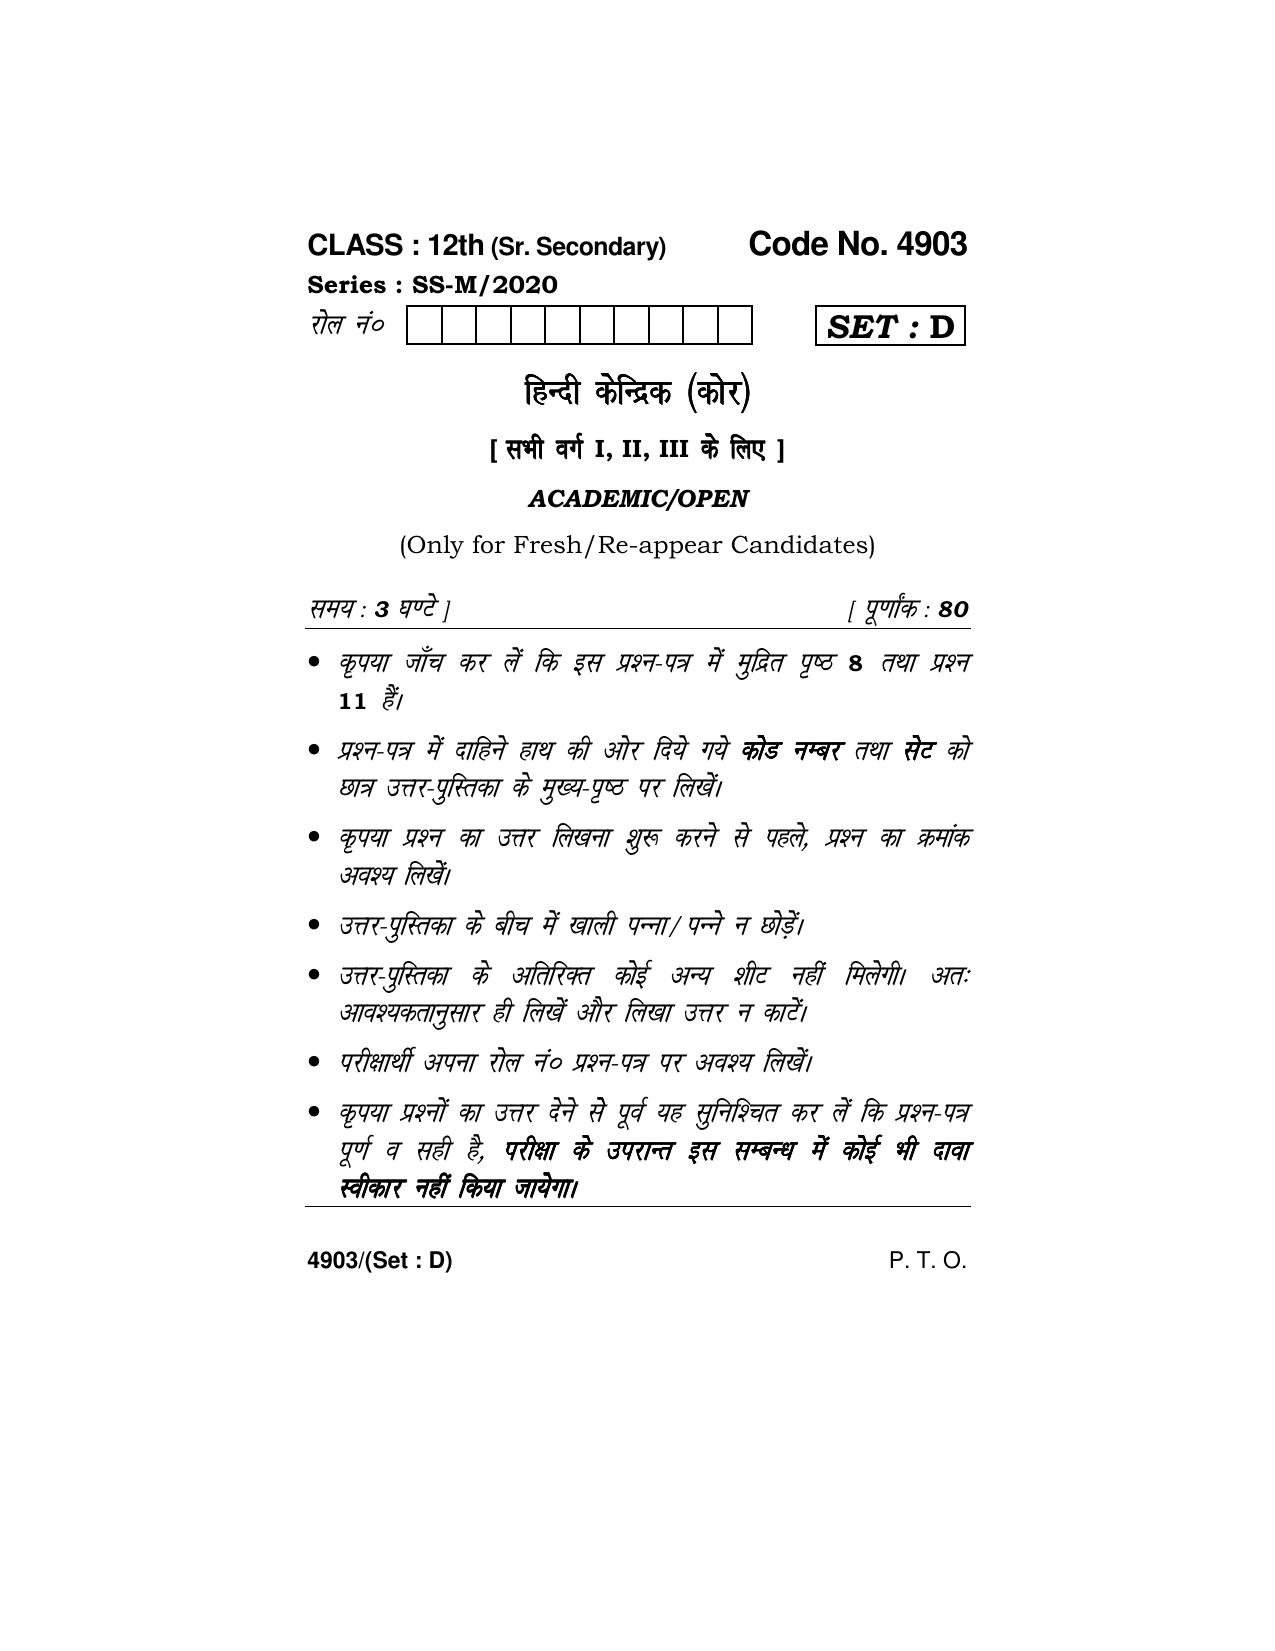 Haryana Board HBSE Class 12 Hindi Core 2020 Question Paper - Page 25